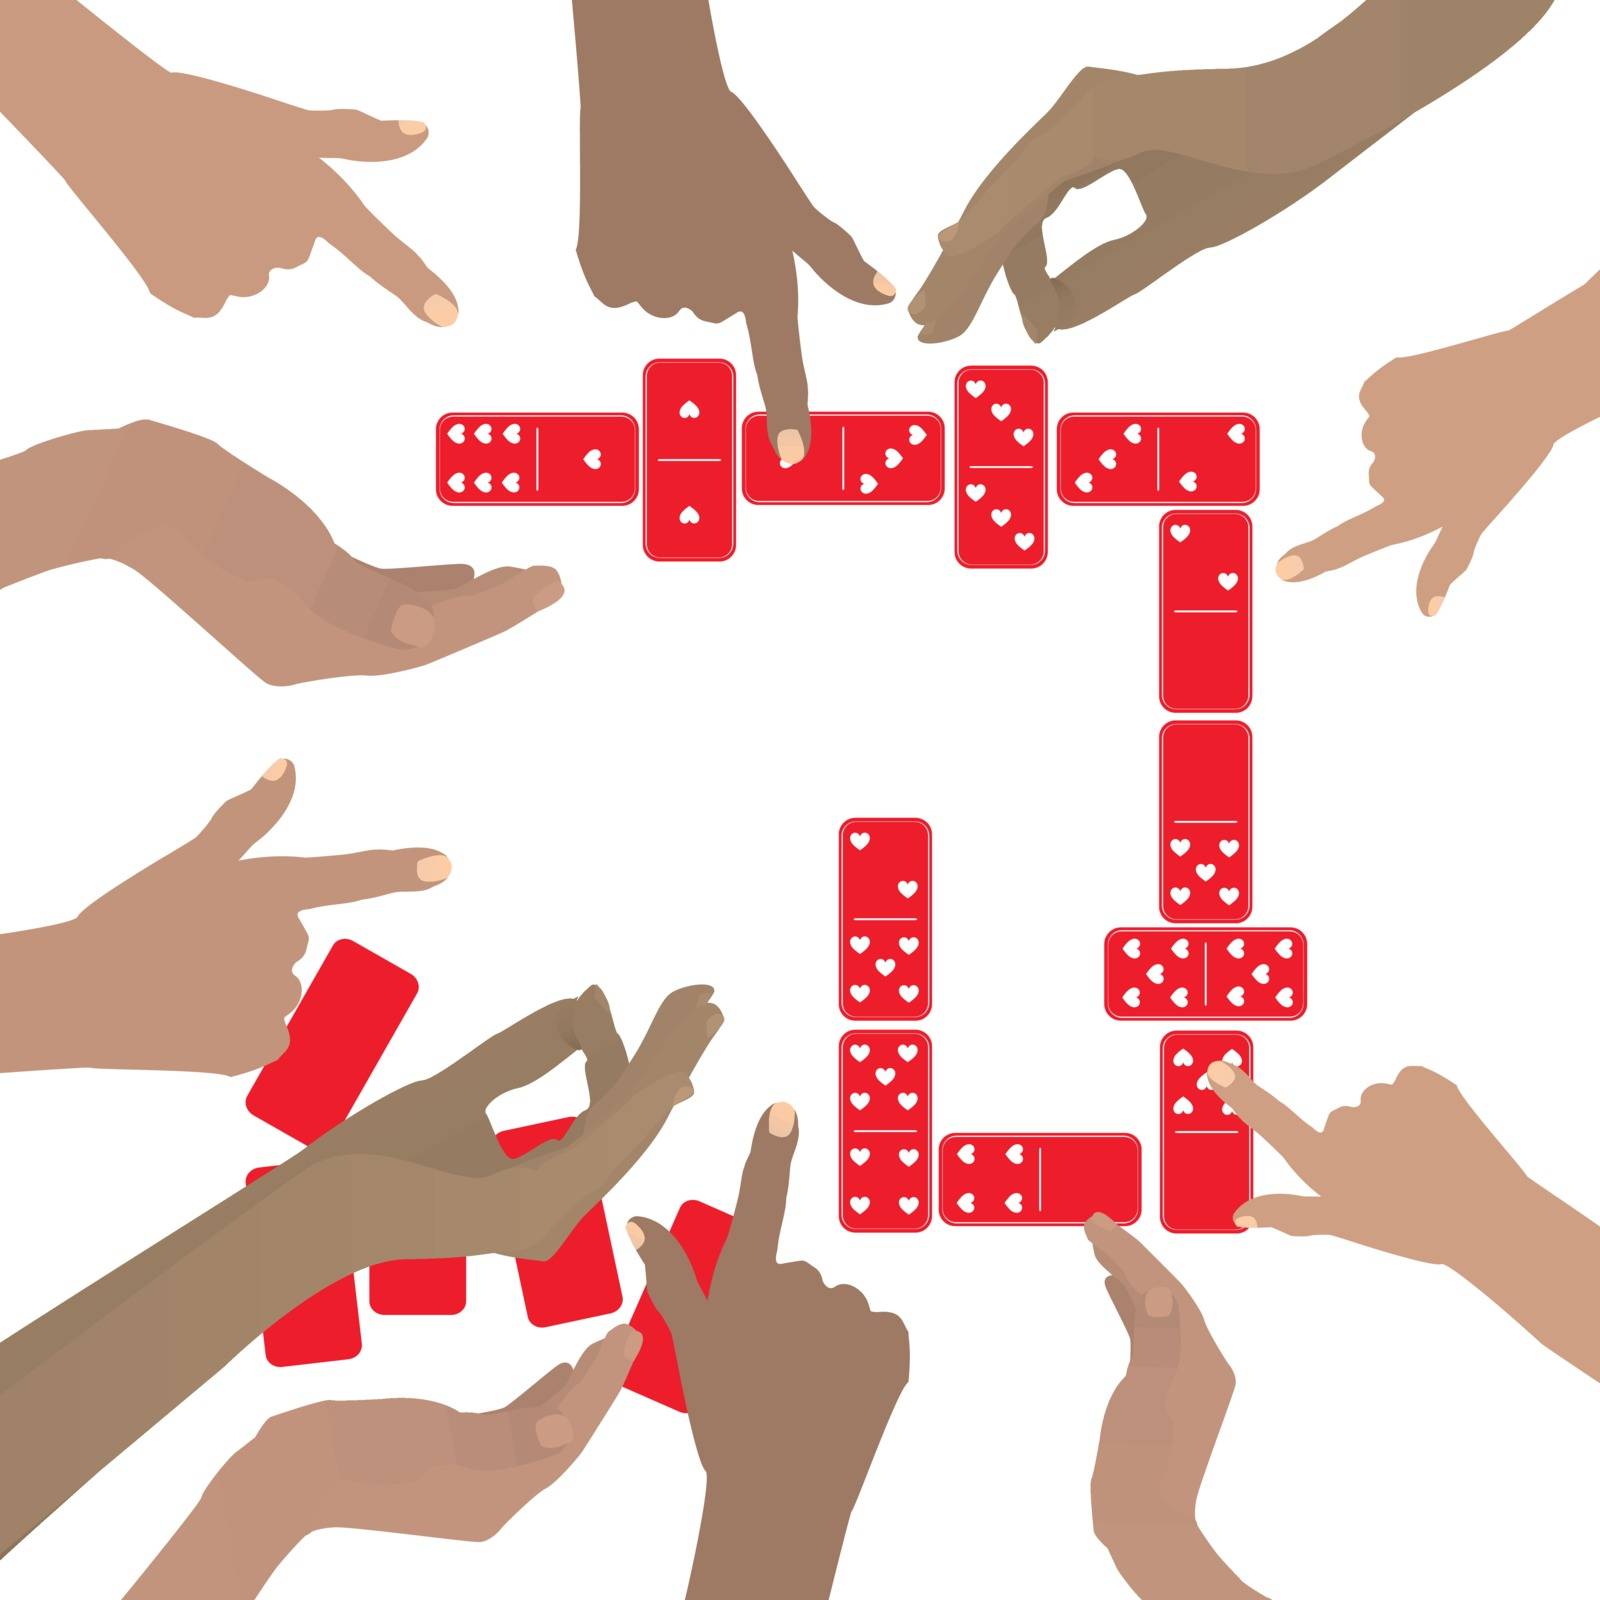 Hands playing dominoes red. On a white background by xenium